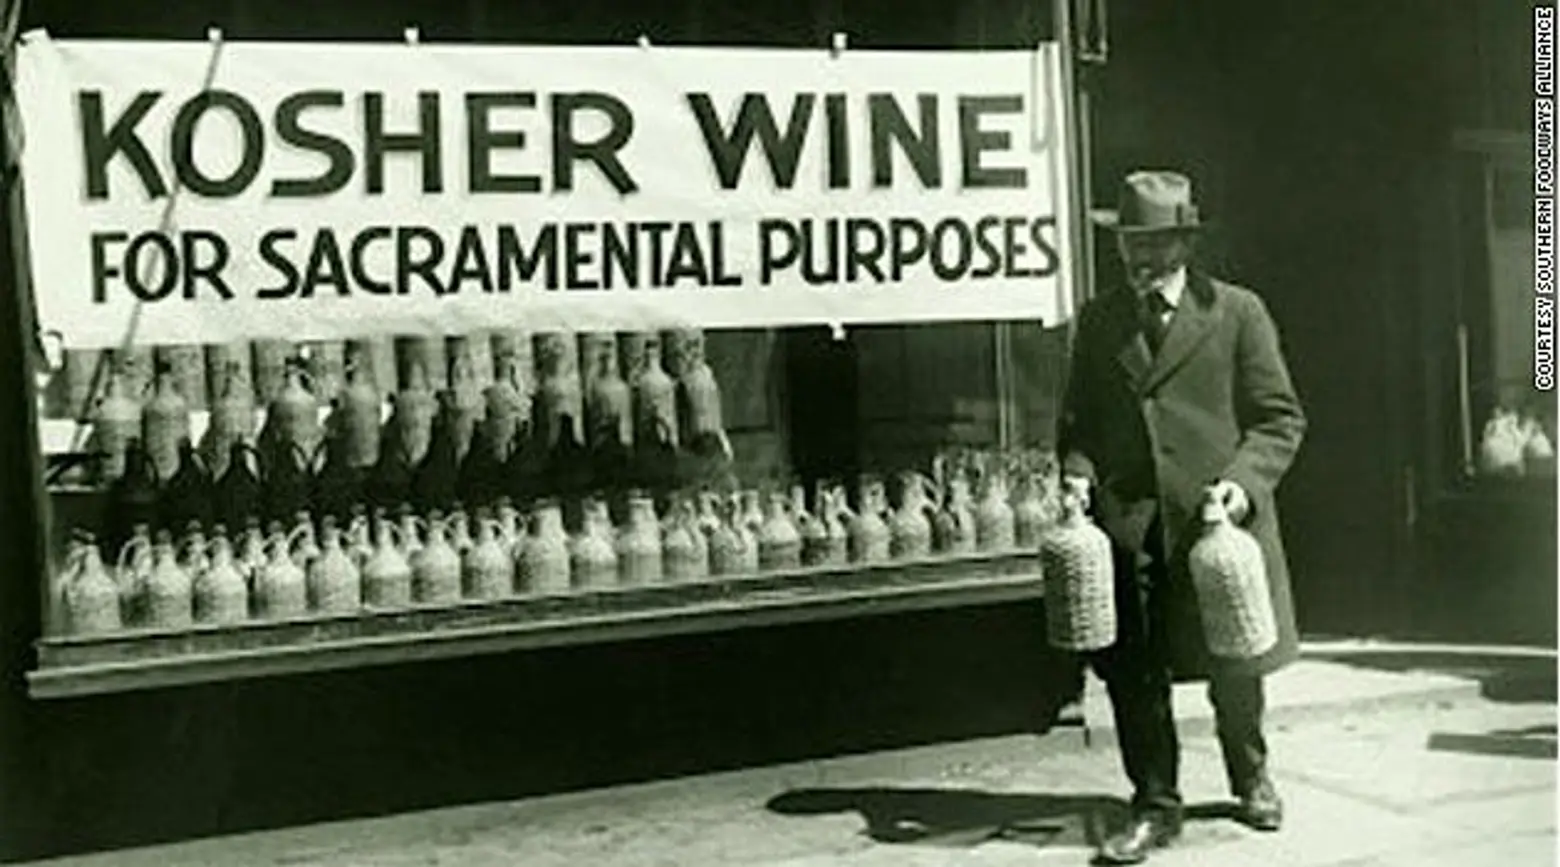 Alcohol could still be used for religeous purposes so people claimed they were Jewish in order to purchase Kosher wine